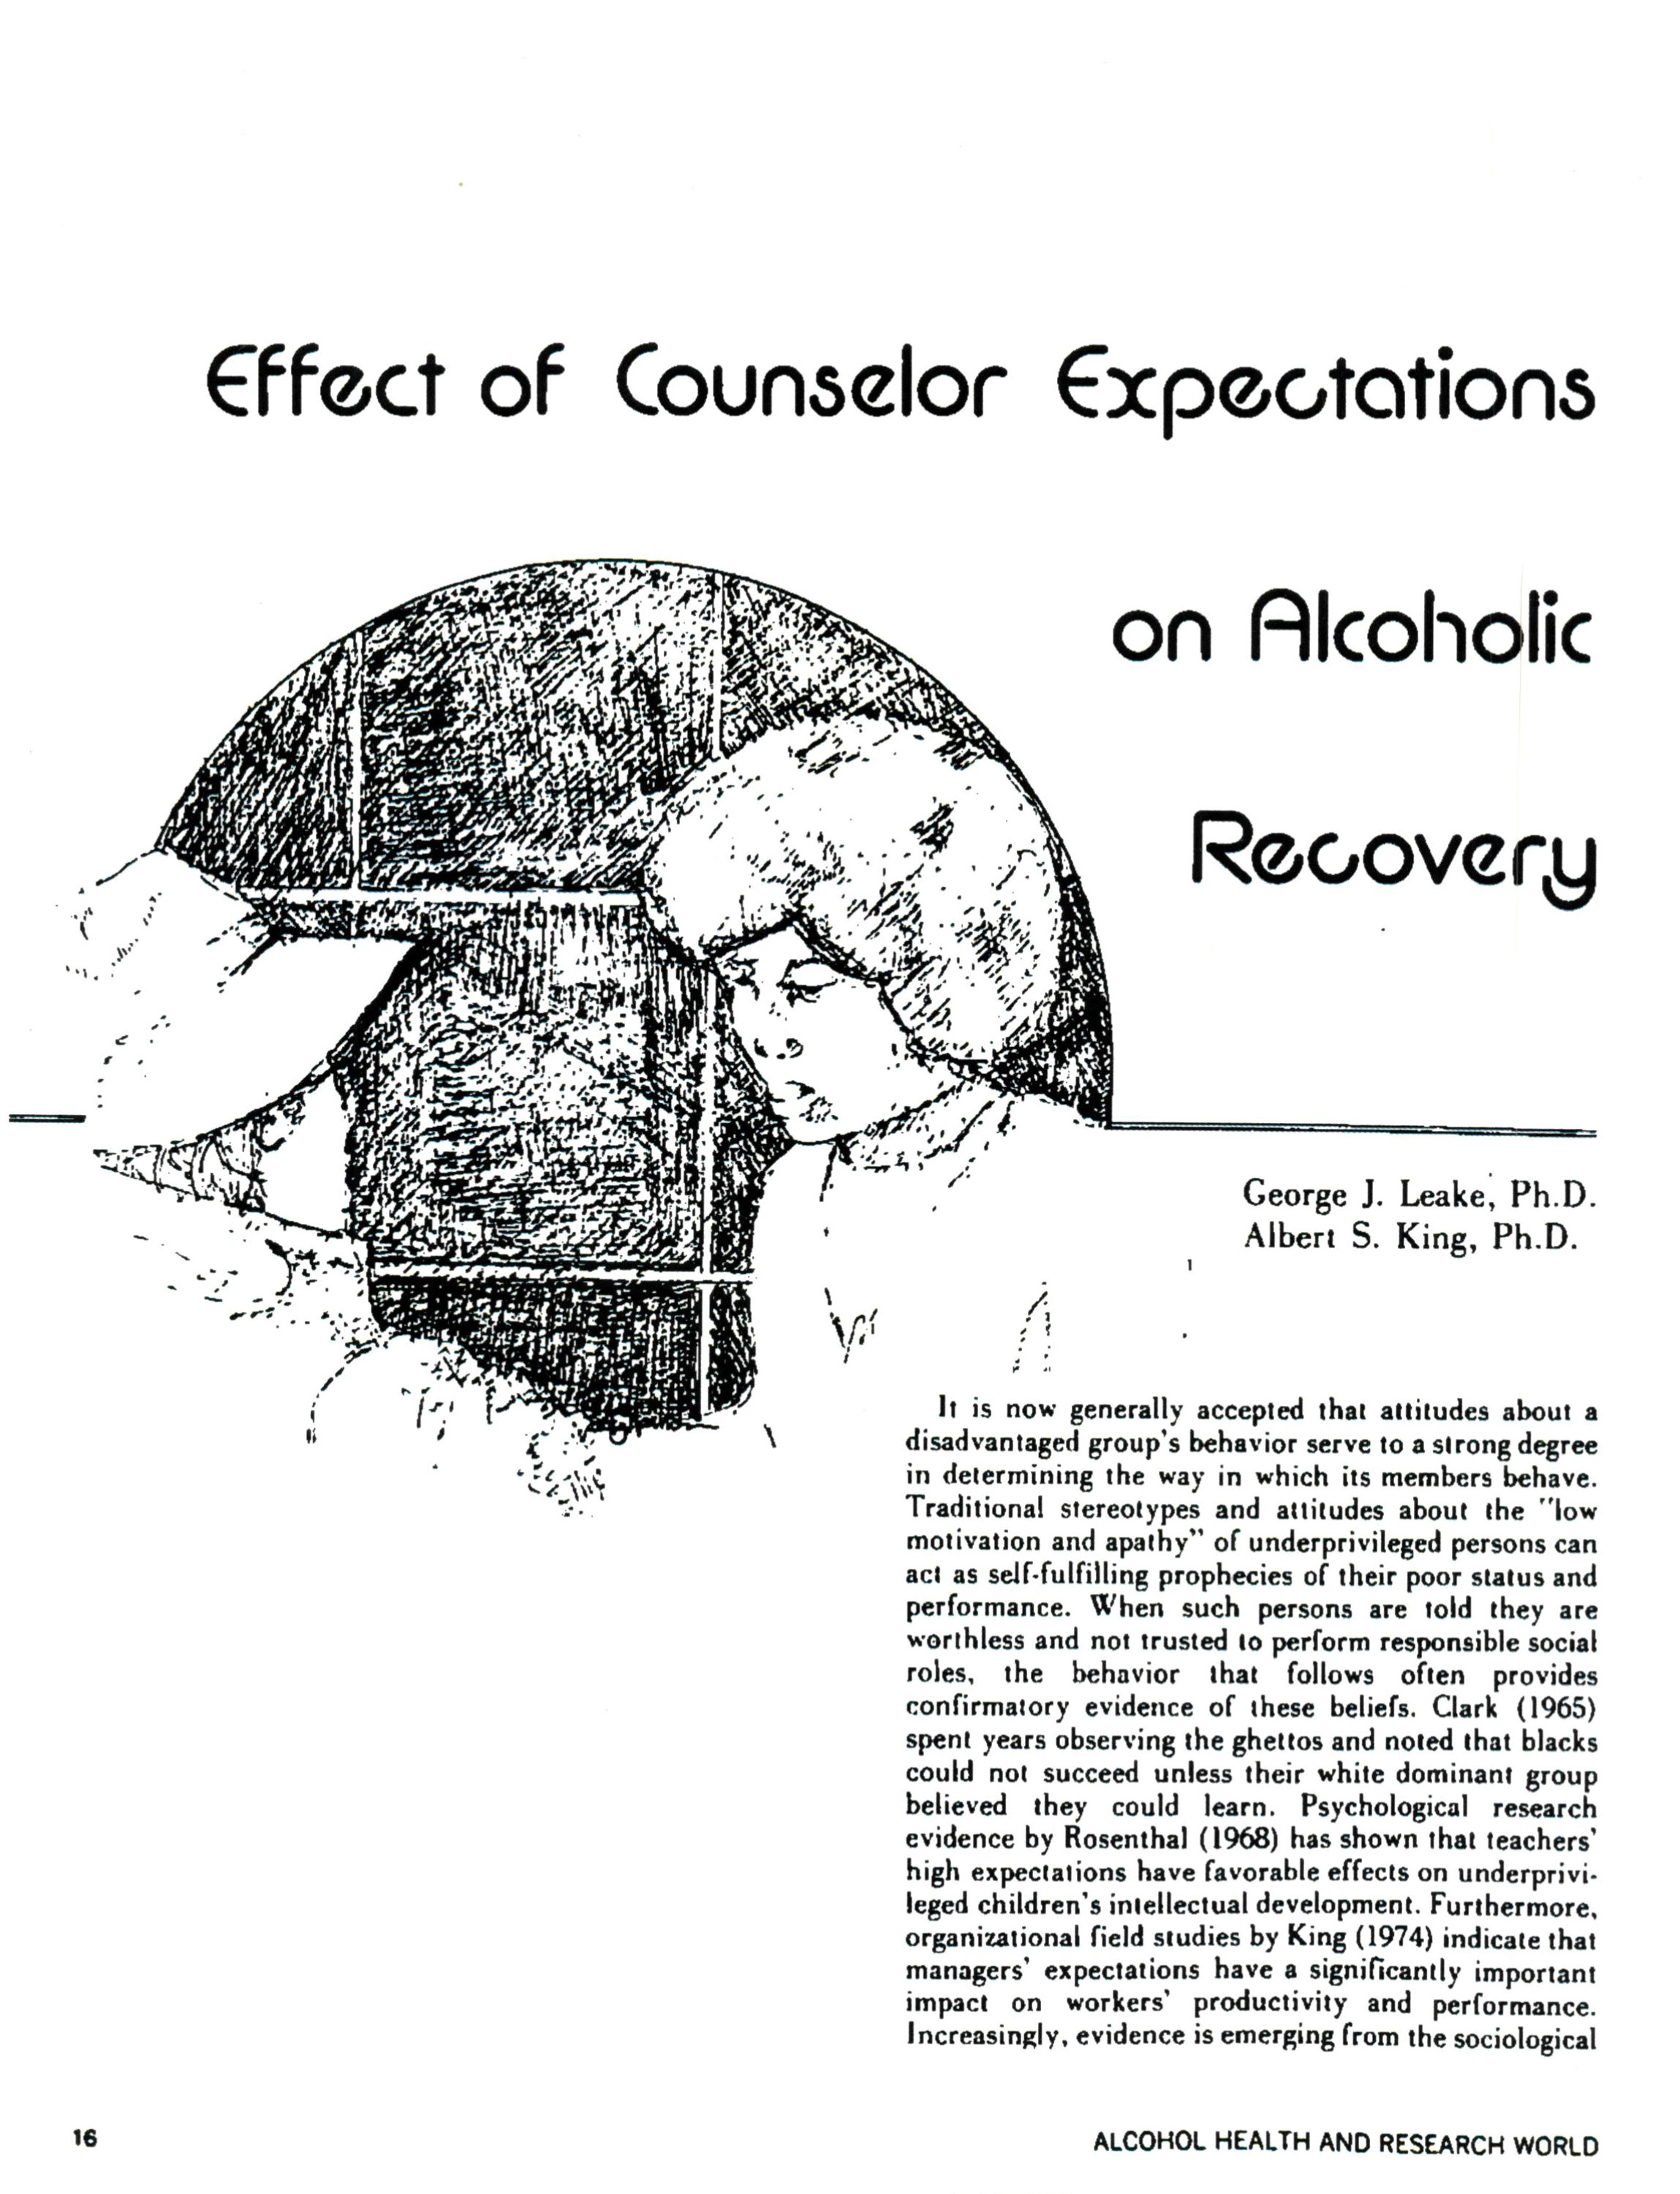 Effect of counselor expectations on alcoholic recovery